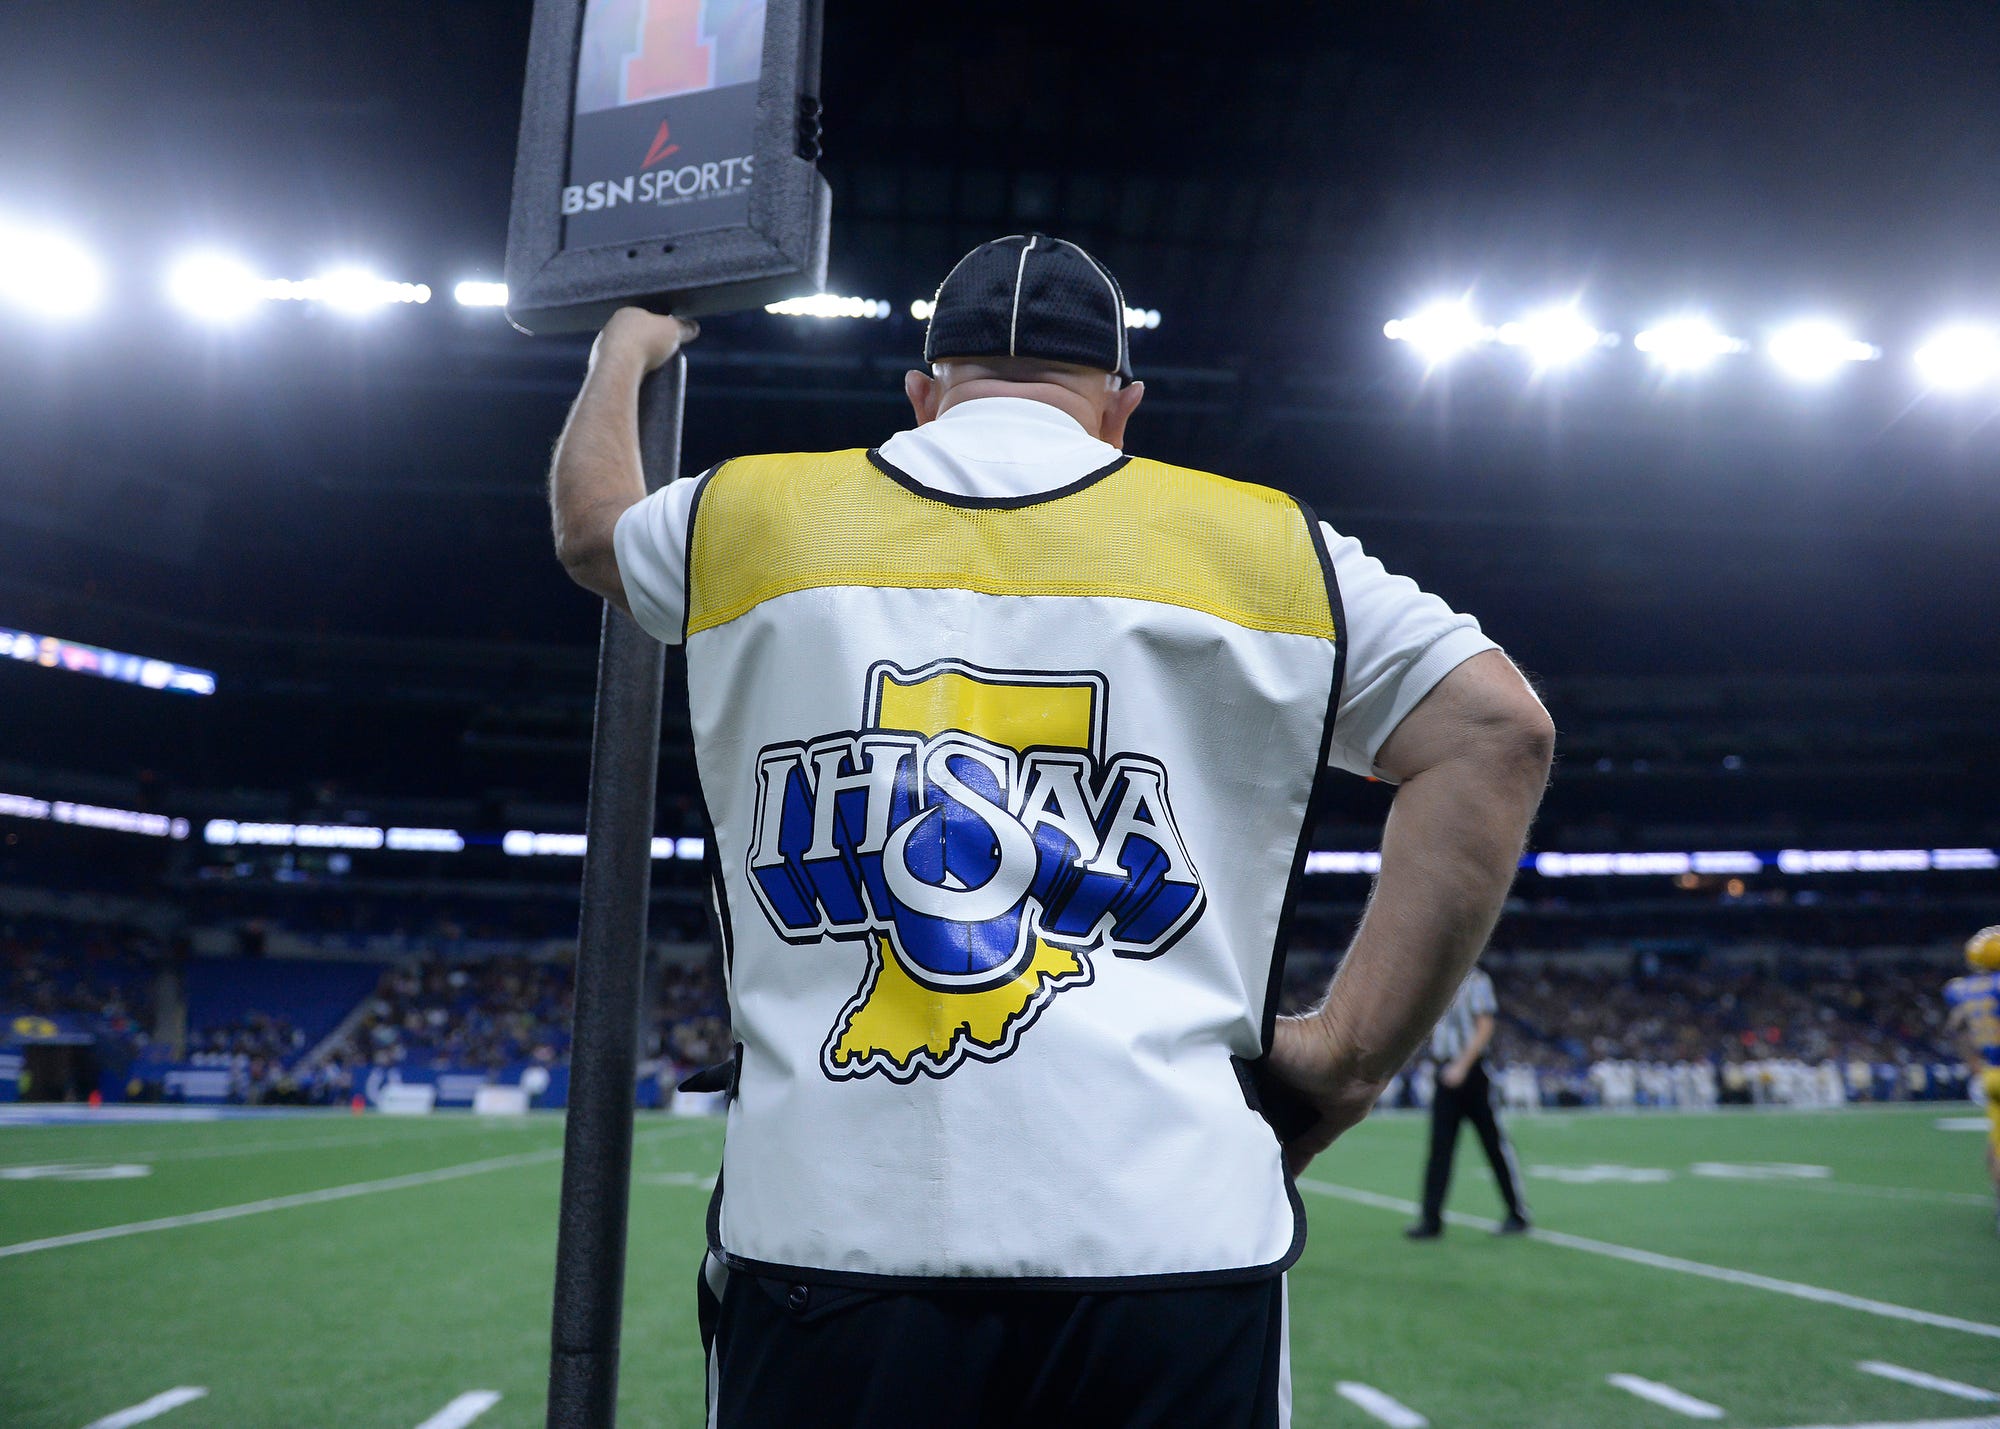 IHSAA Announces All SemiState Football Games Will Be Available on Pay